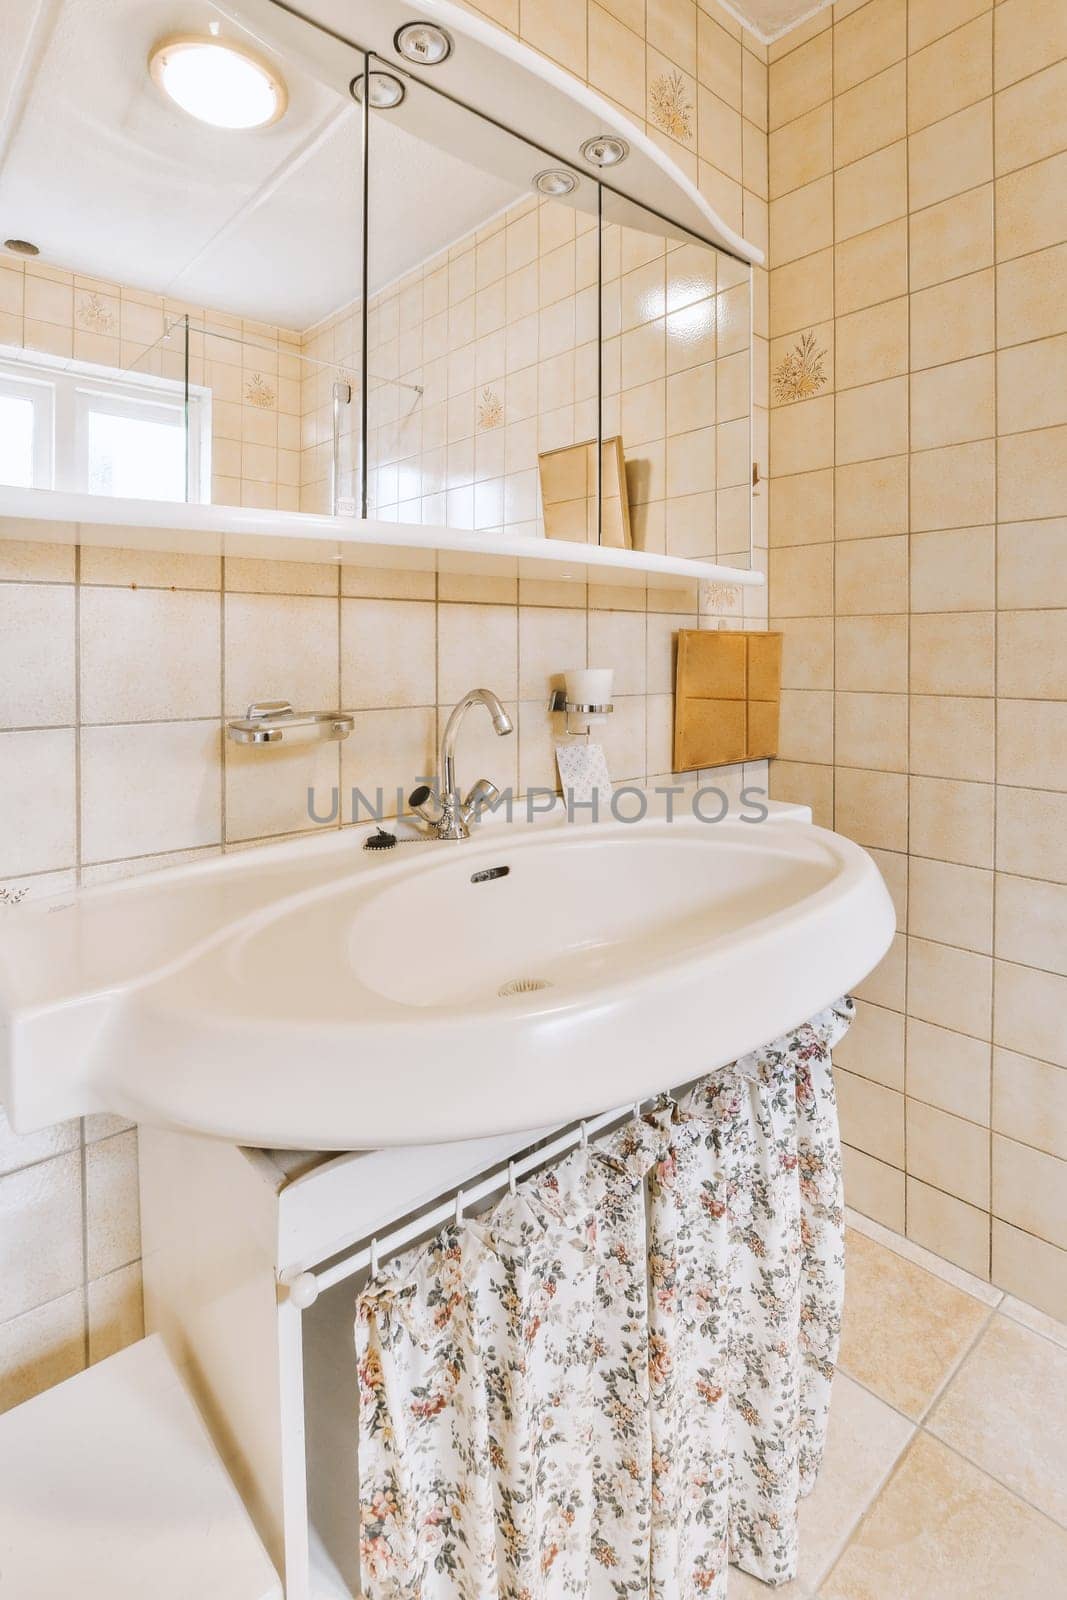 a bathroom with a sink, mirror and toilet paper on the wall in this photo is taken from above it